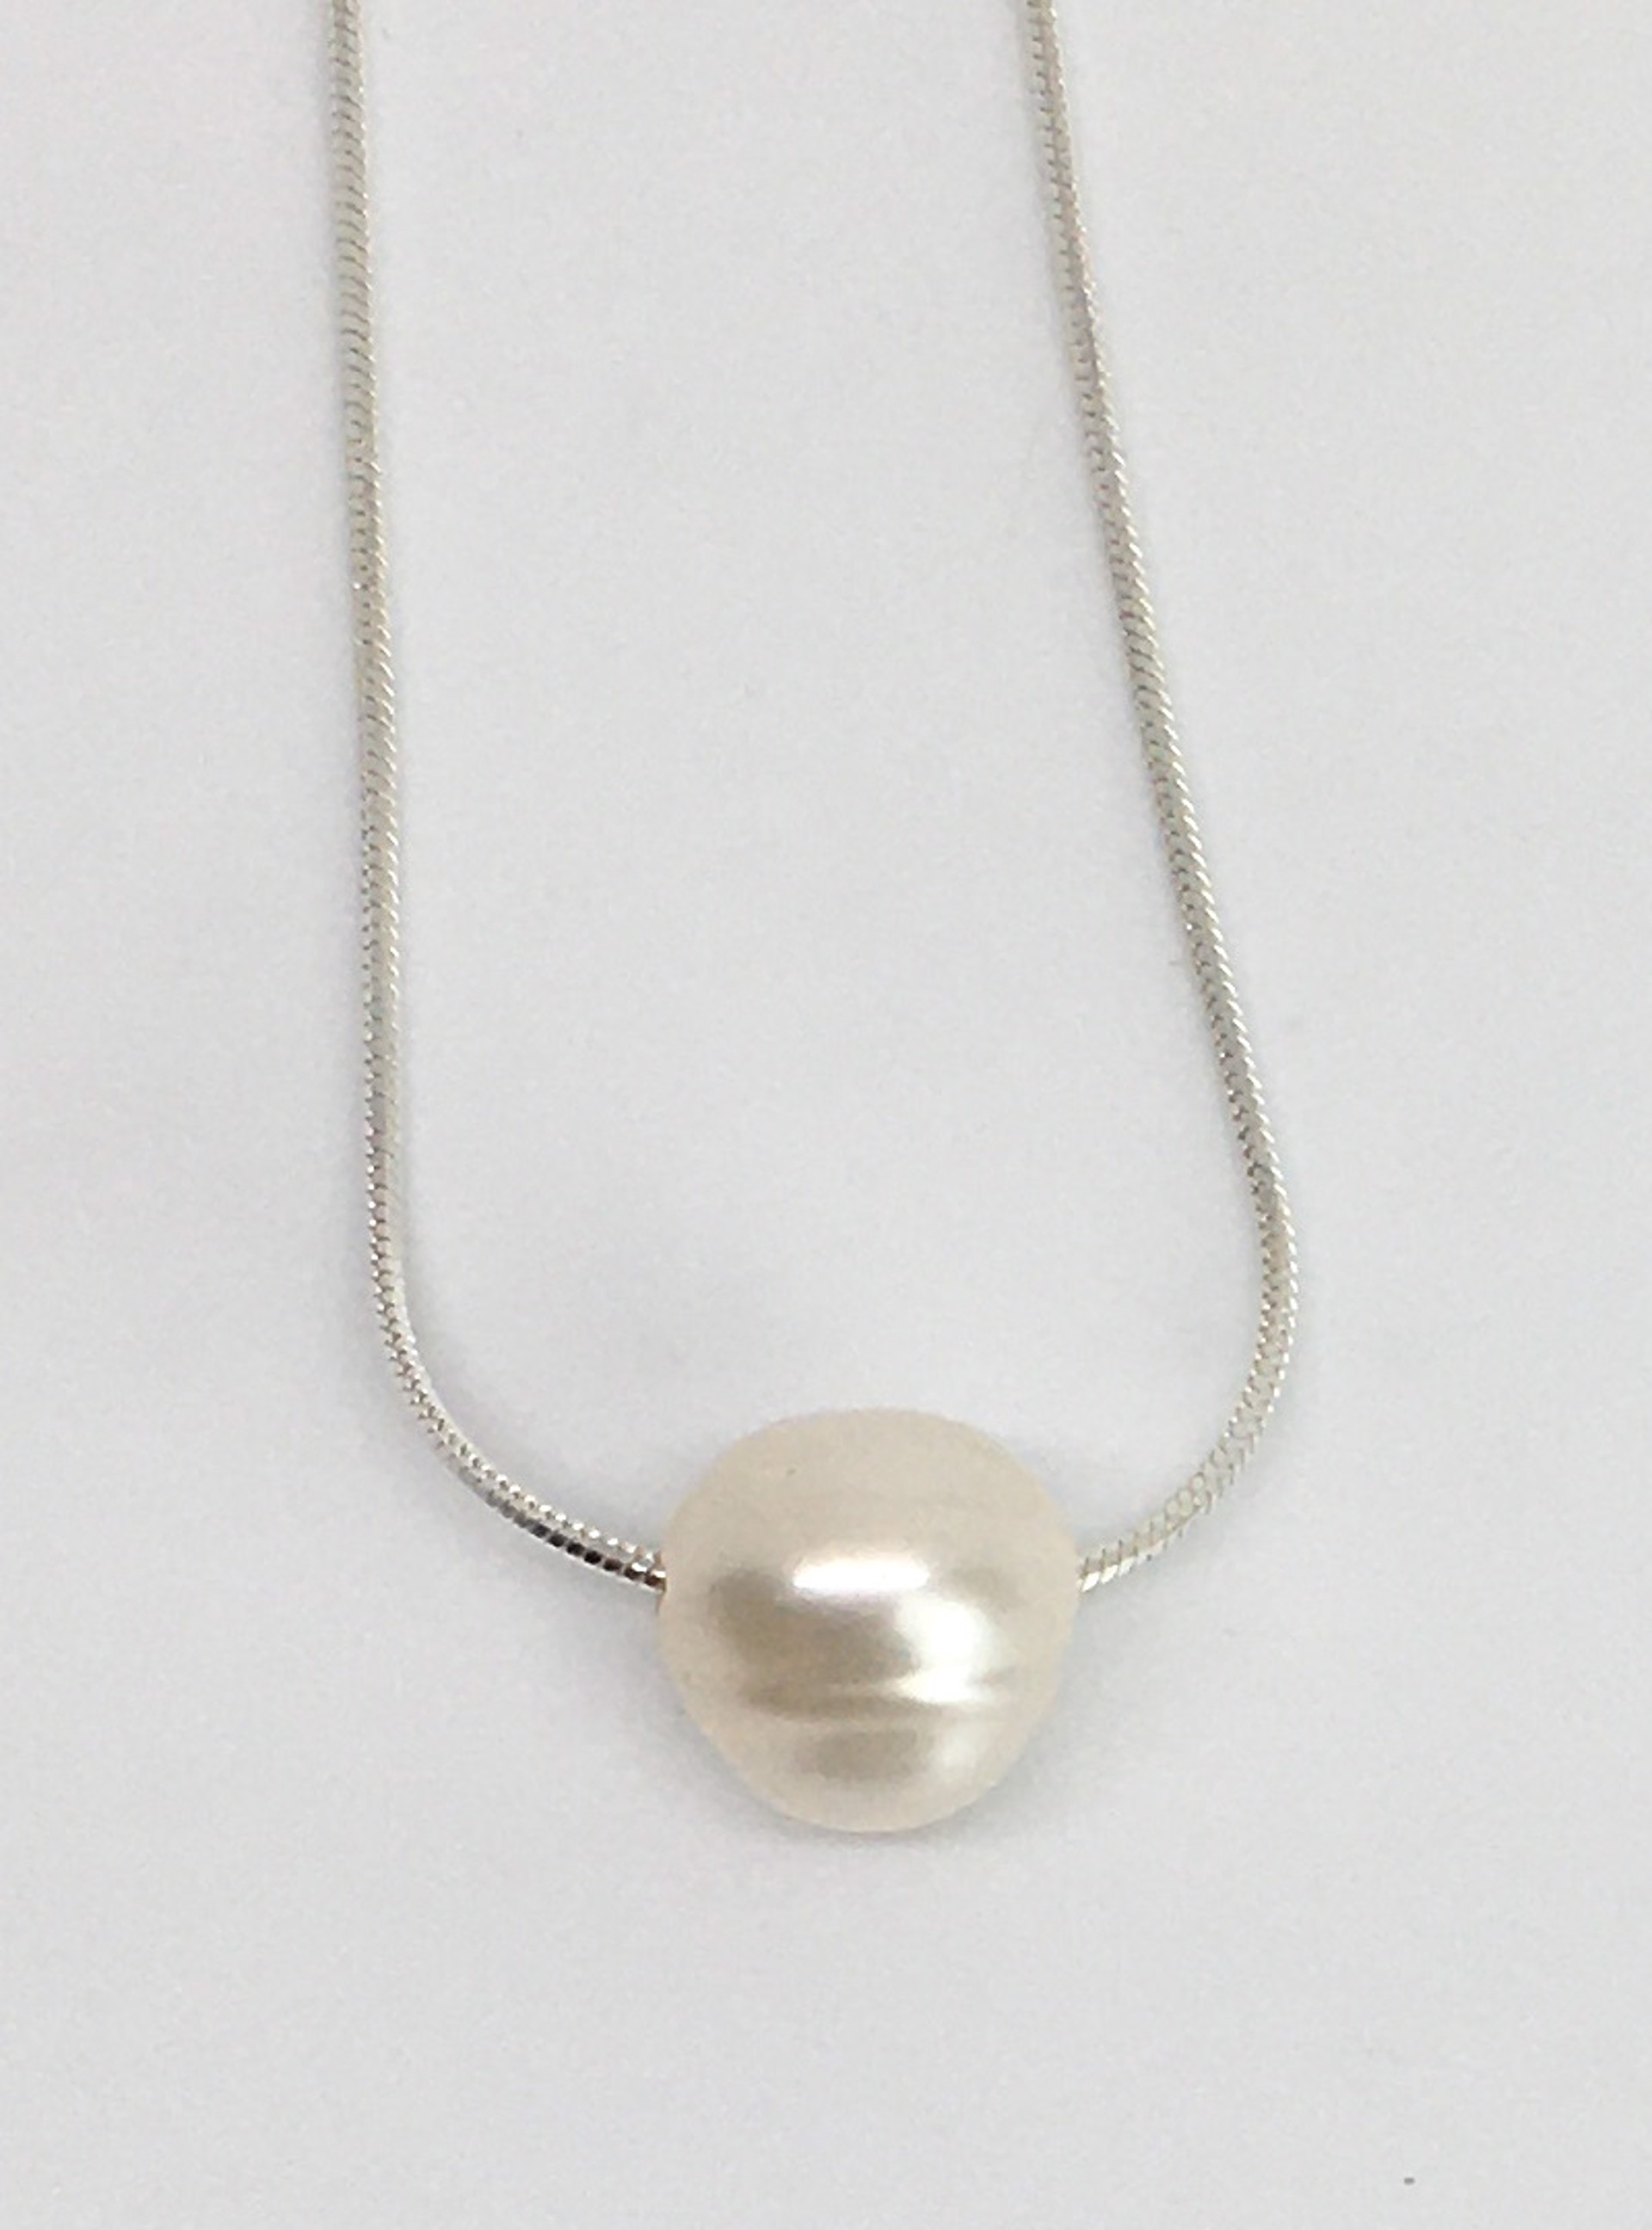 20" Eunity Sterling Silver - Necklace with Pearl by Suzanne Woodworth